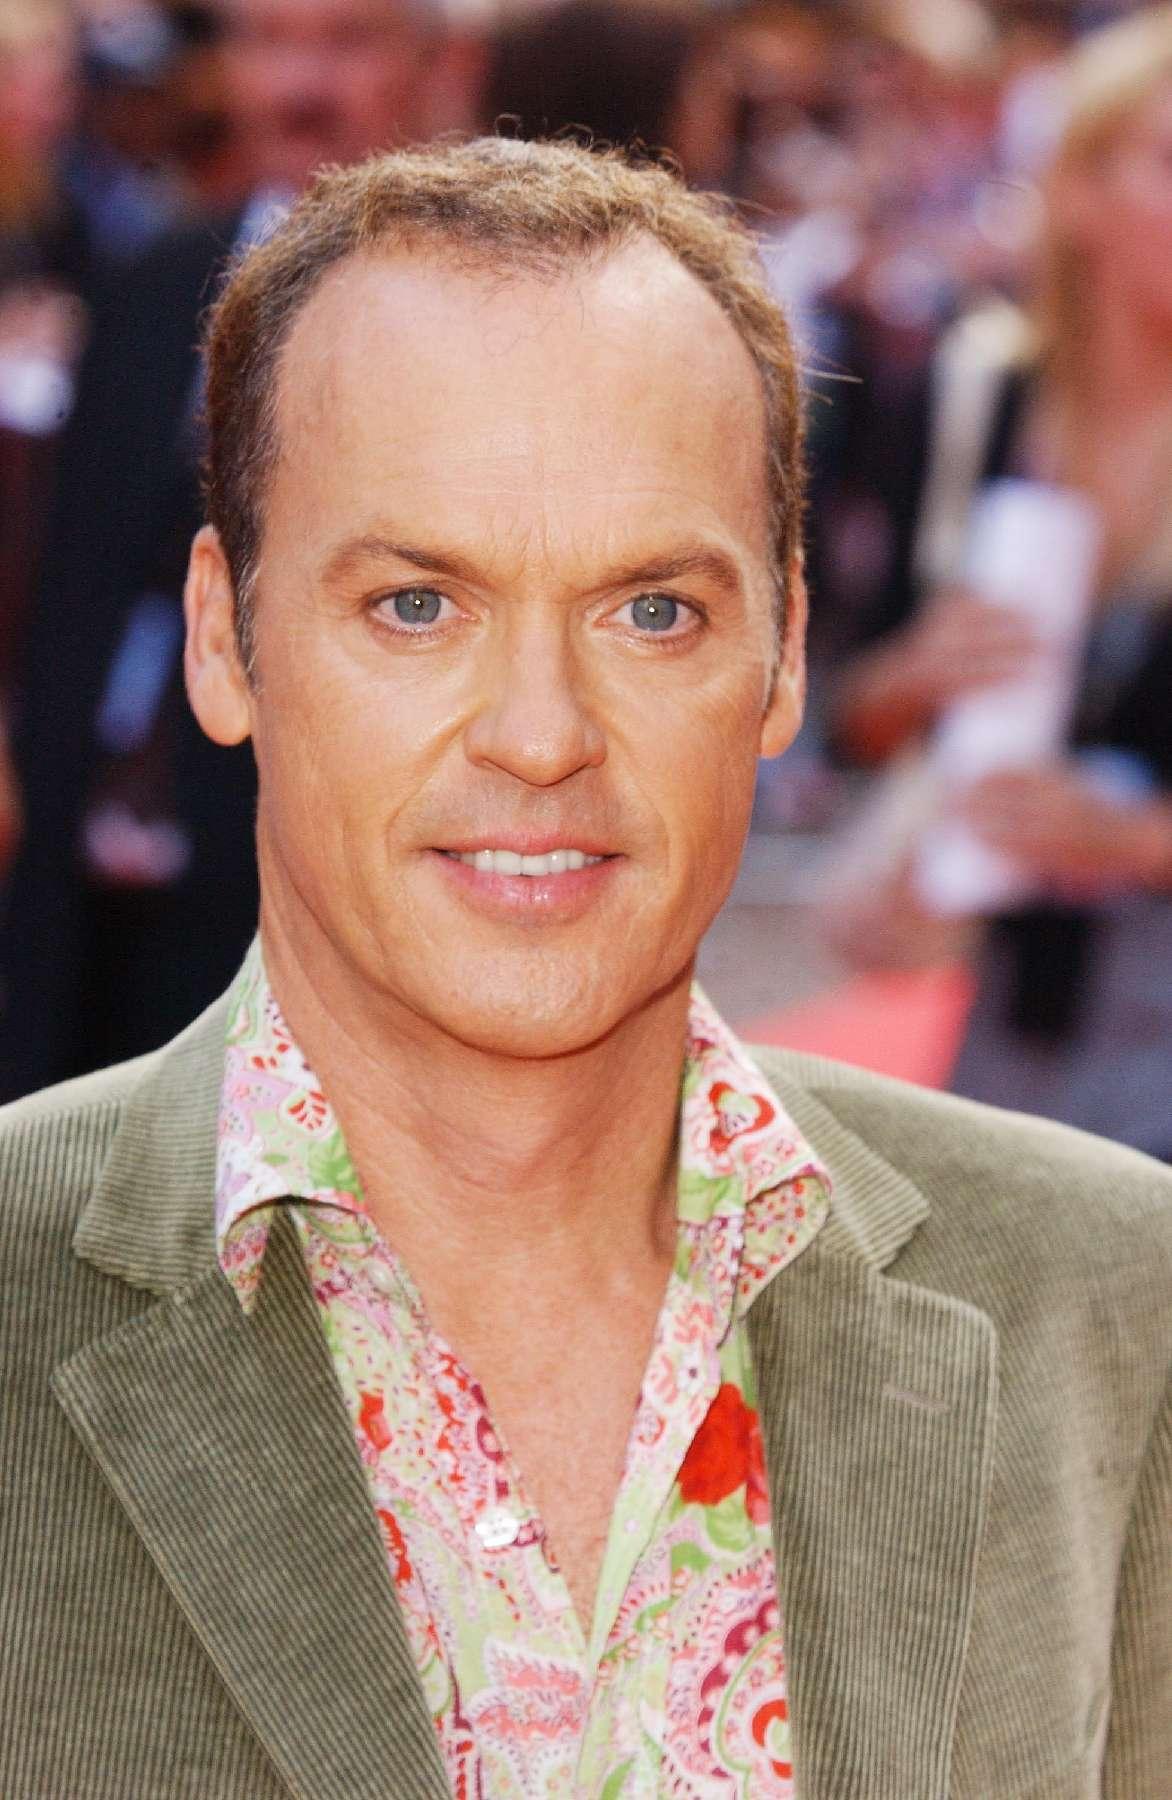 A photo showing Michael Keaton in a green suit and multicolored T-shirt.